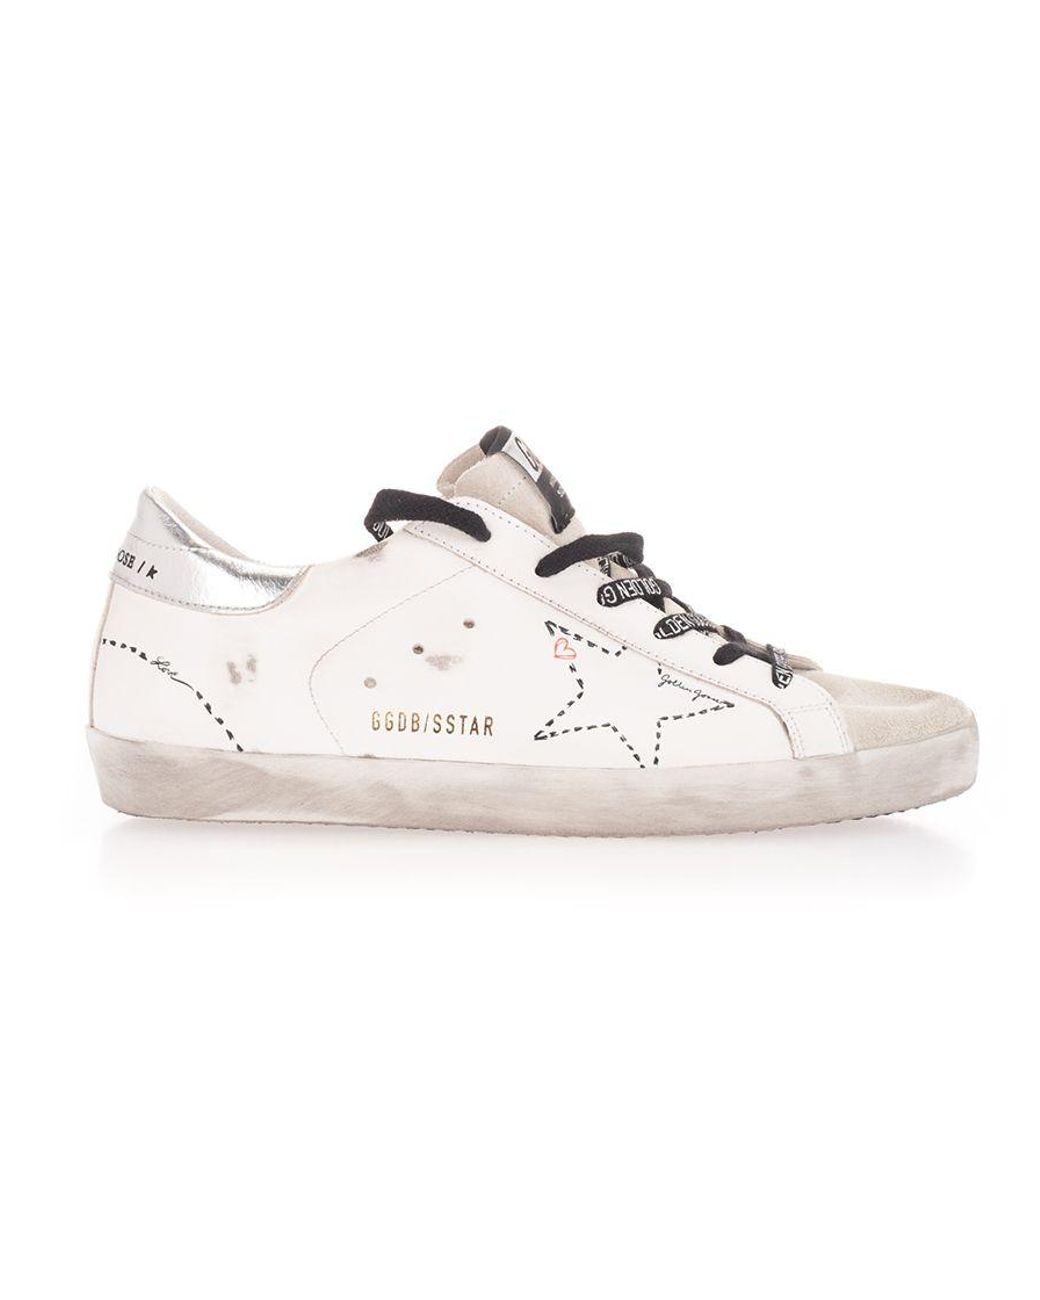 Golden Goose Deluxe Brand Leather Sneakers in White - Lyst